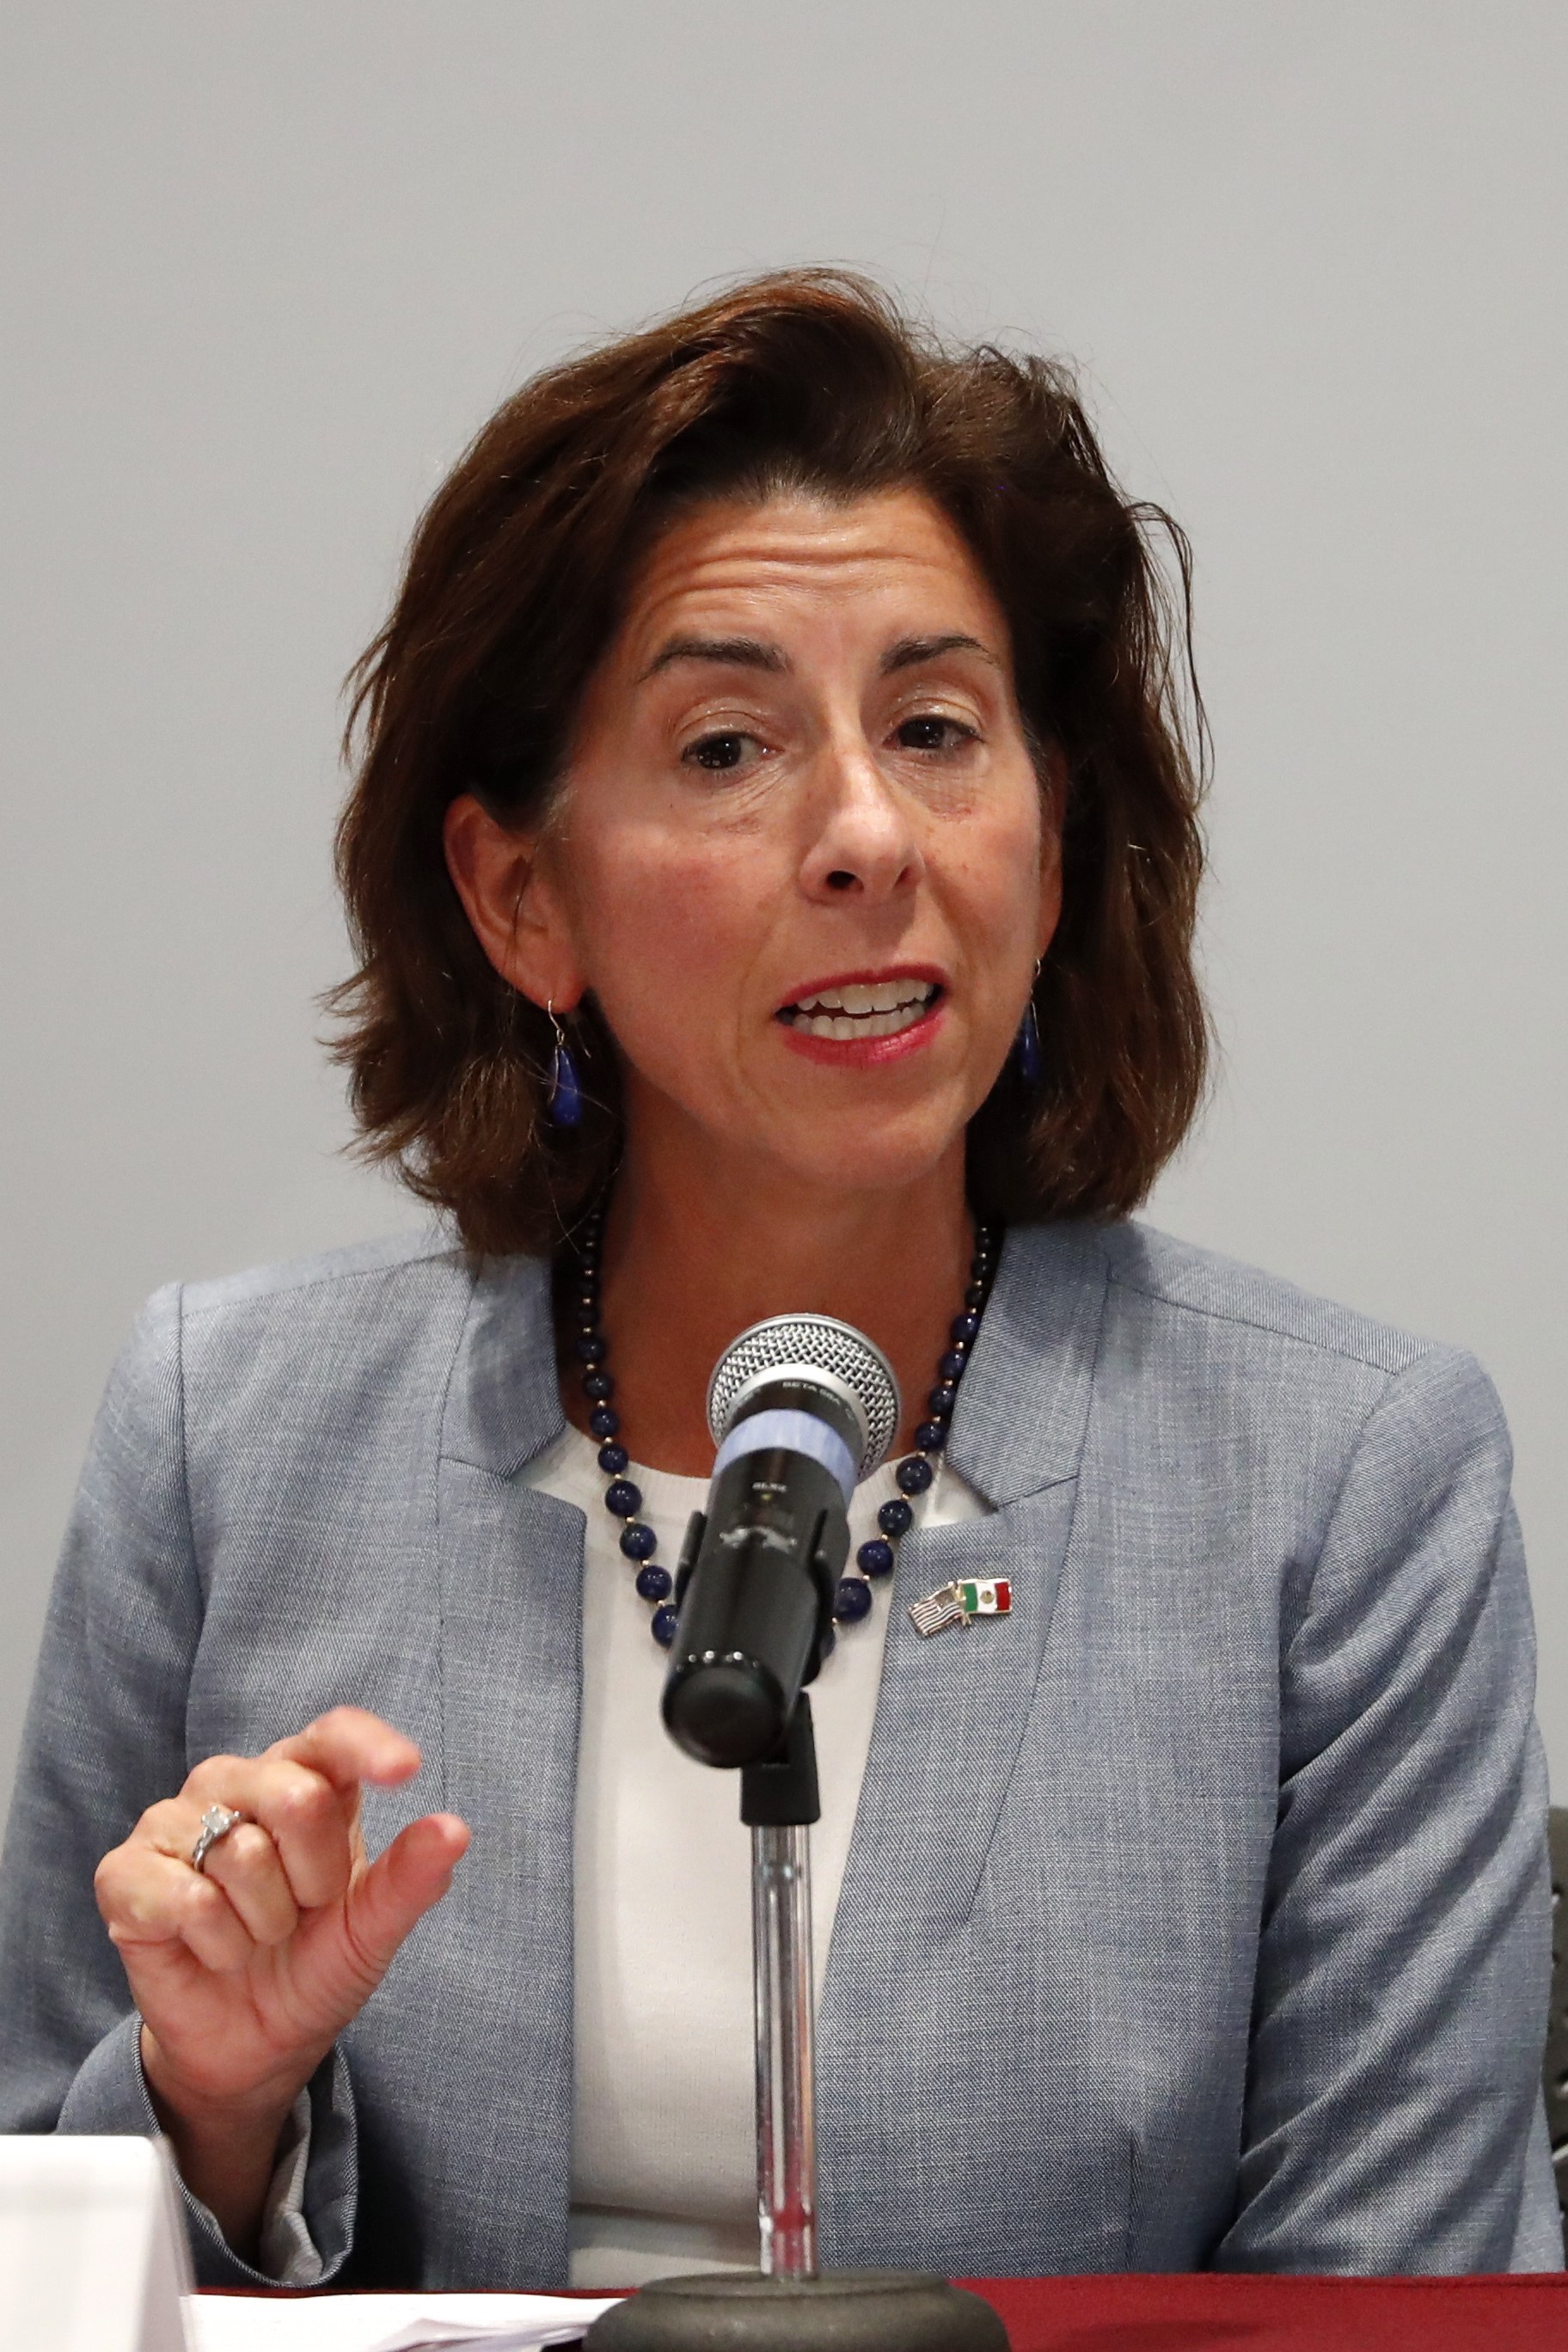 Discussing enforcement of the new CHIPS and Science law, US Secretary of Commerce Gina Raimondo said that “the whole point of this is to secure national security”. Photo: EPA-EFE